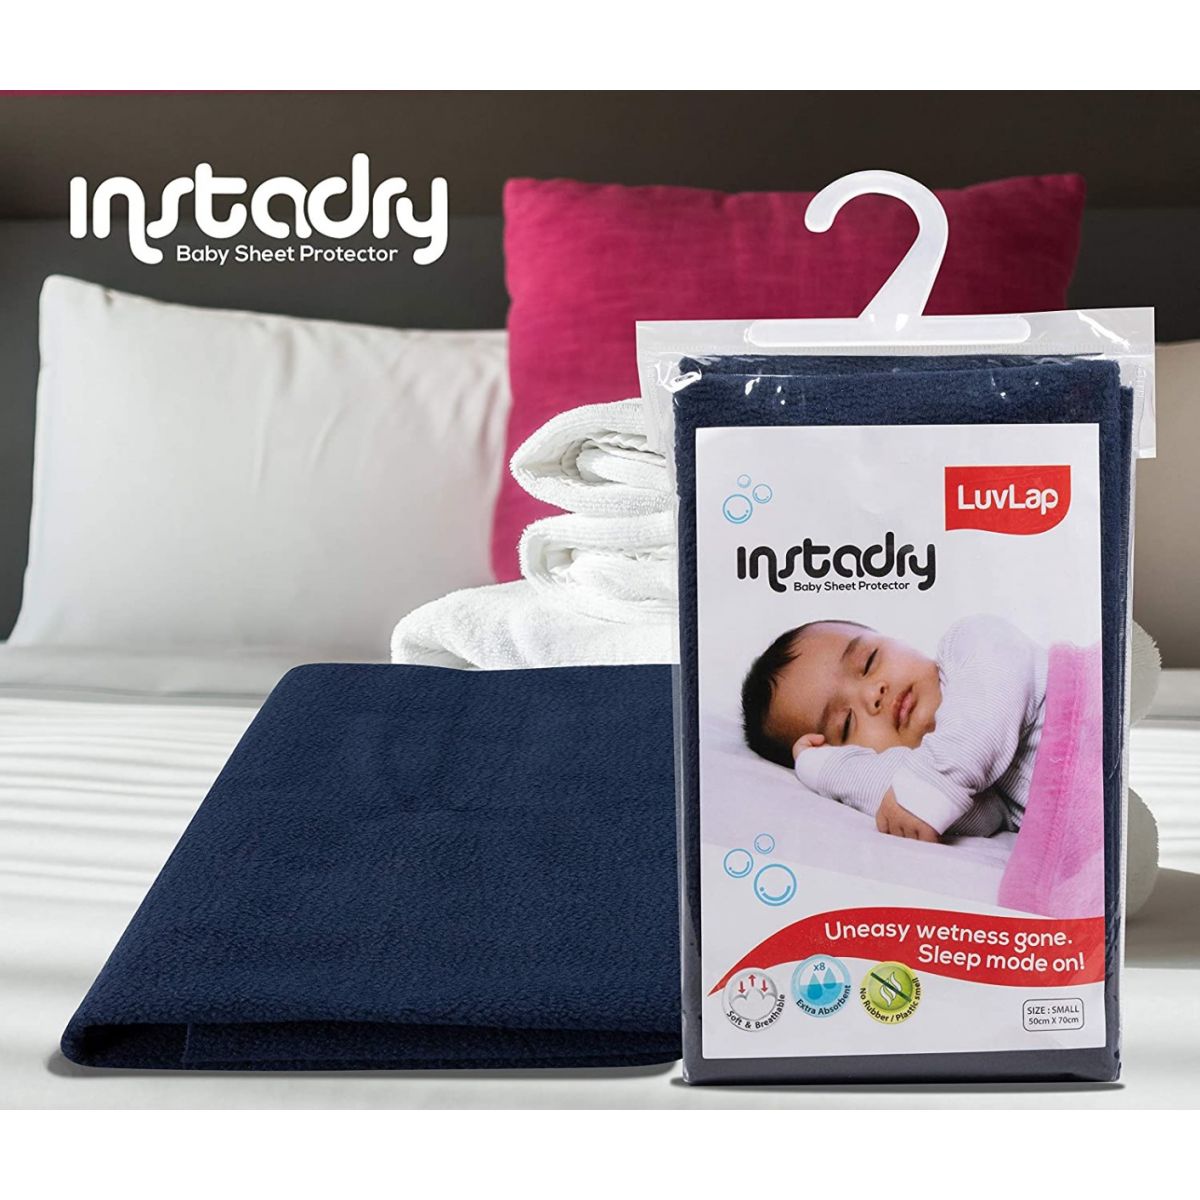 Luvlap Instadry Extra Absorbent Dry Sheet / Bed Protector - Navy Blue